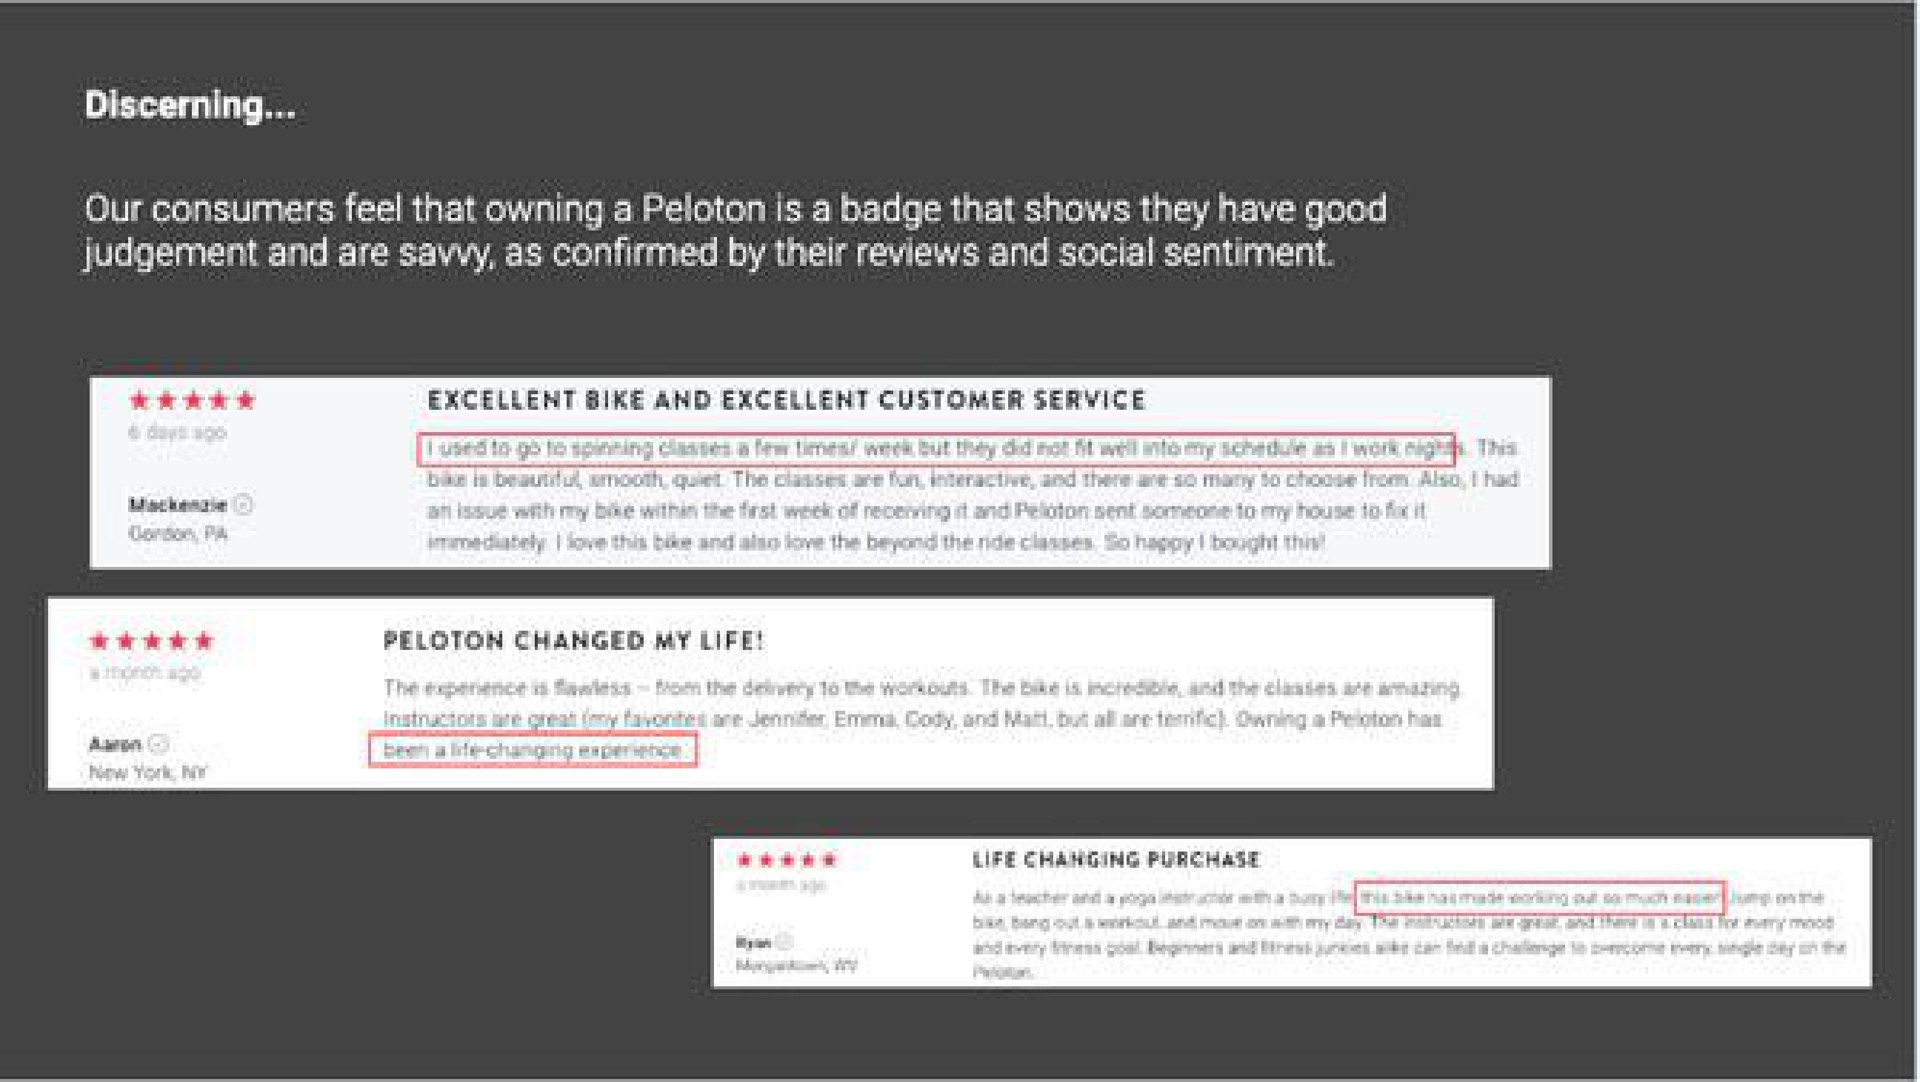 and are savvy as confirmed by their reviews and social sentiment eel ere bel risen ogre bae | Peloton